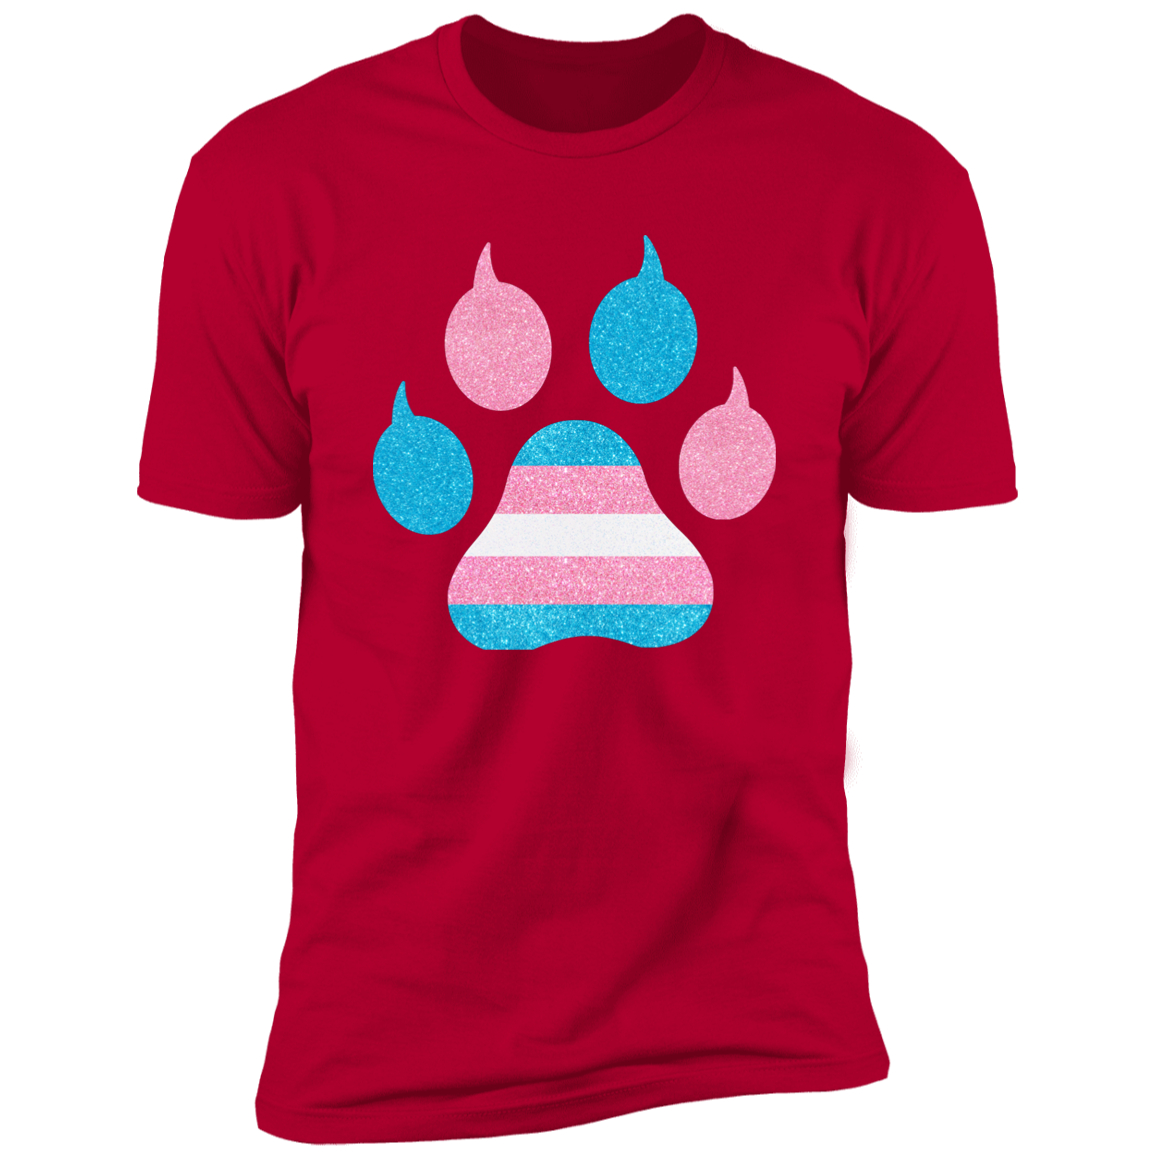 Trans Pride Cat Paw trans pride t-shirt,  trans cat paw pride shirt for humans, in red